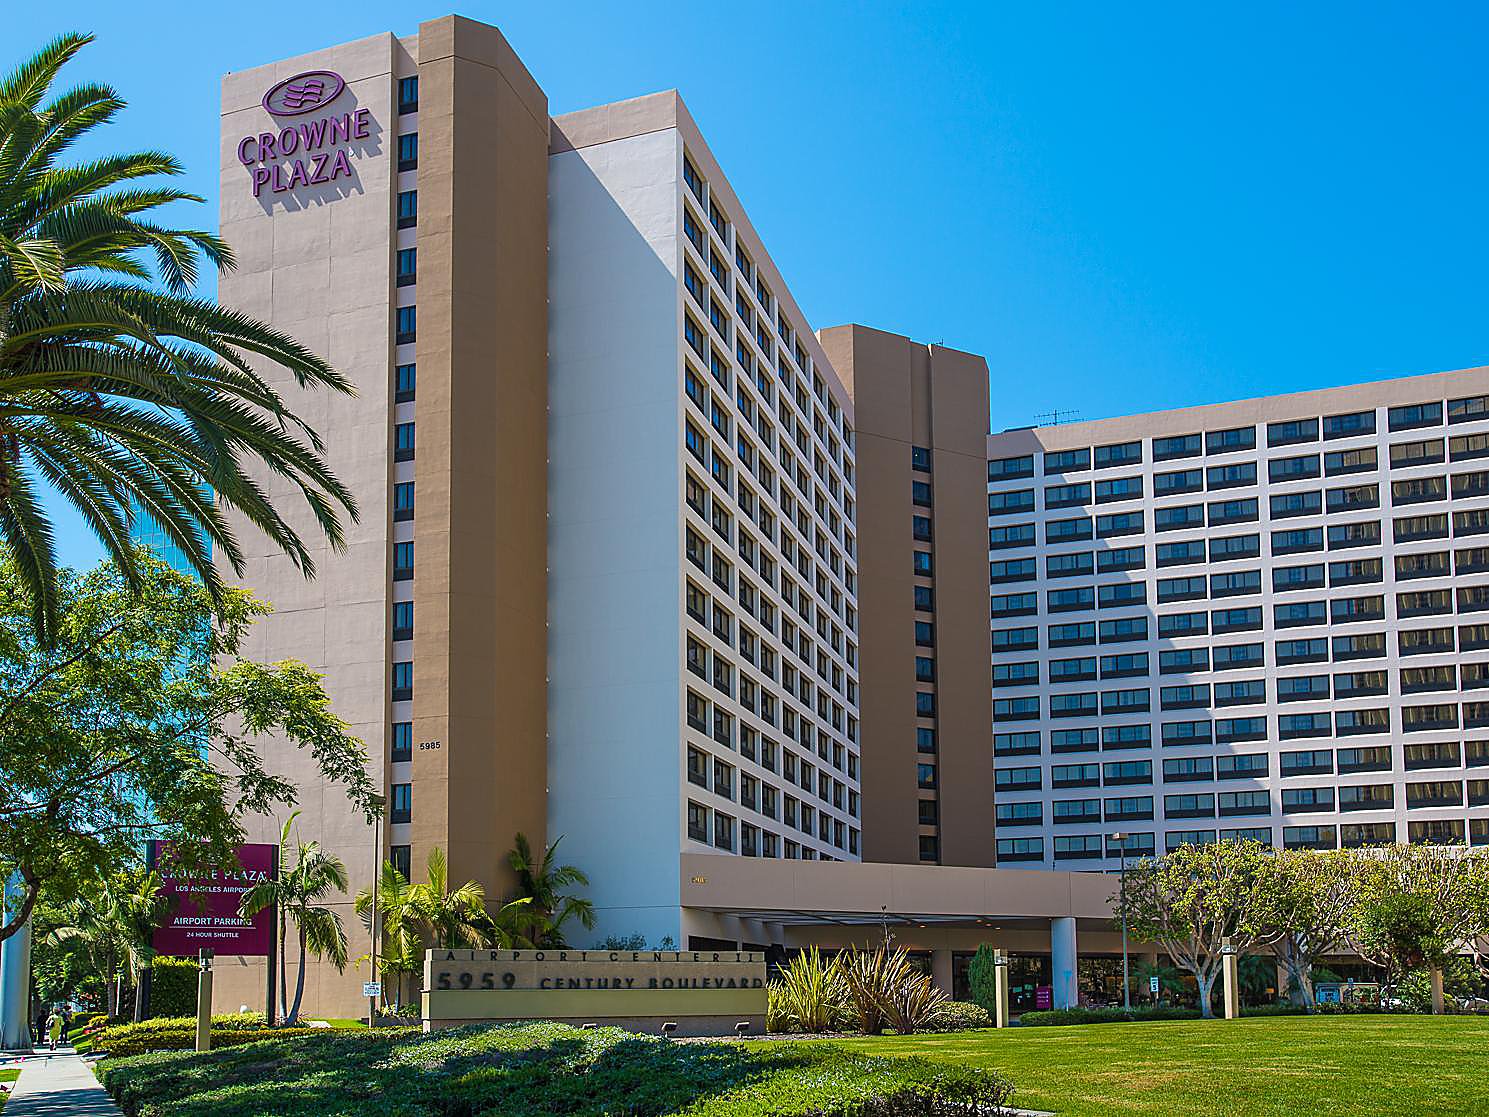 Crowne Plaza Los Angeles Airport Hotels Near Lax Airport